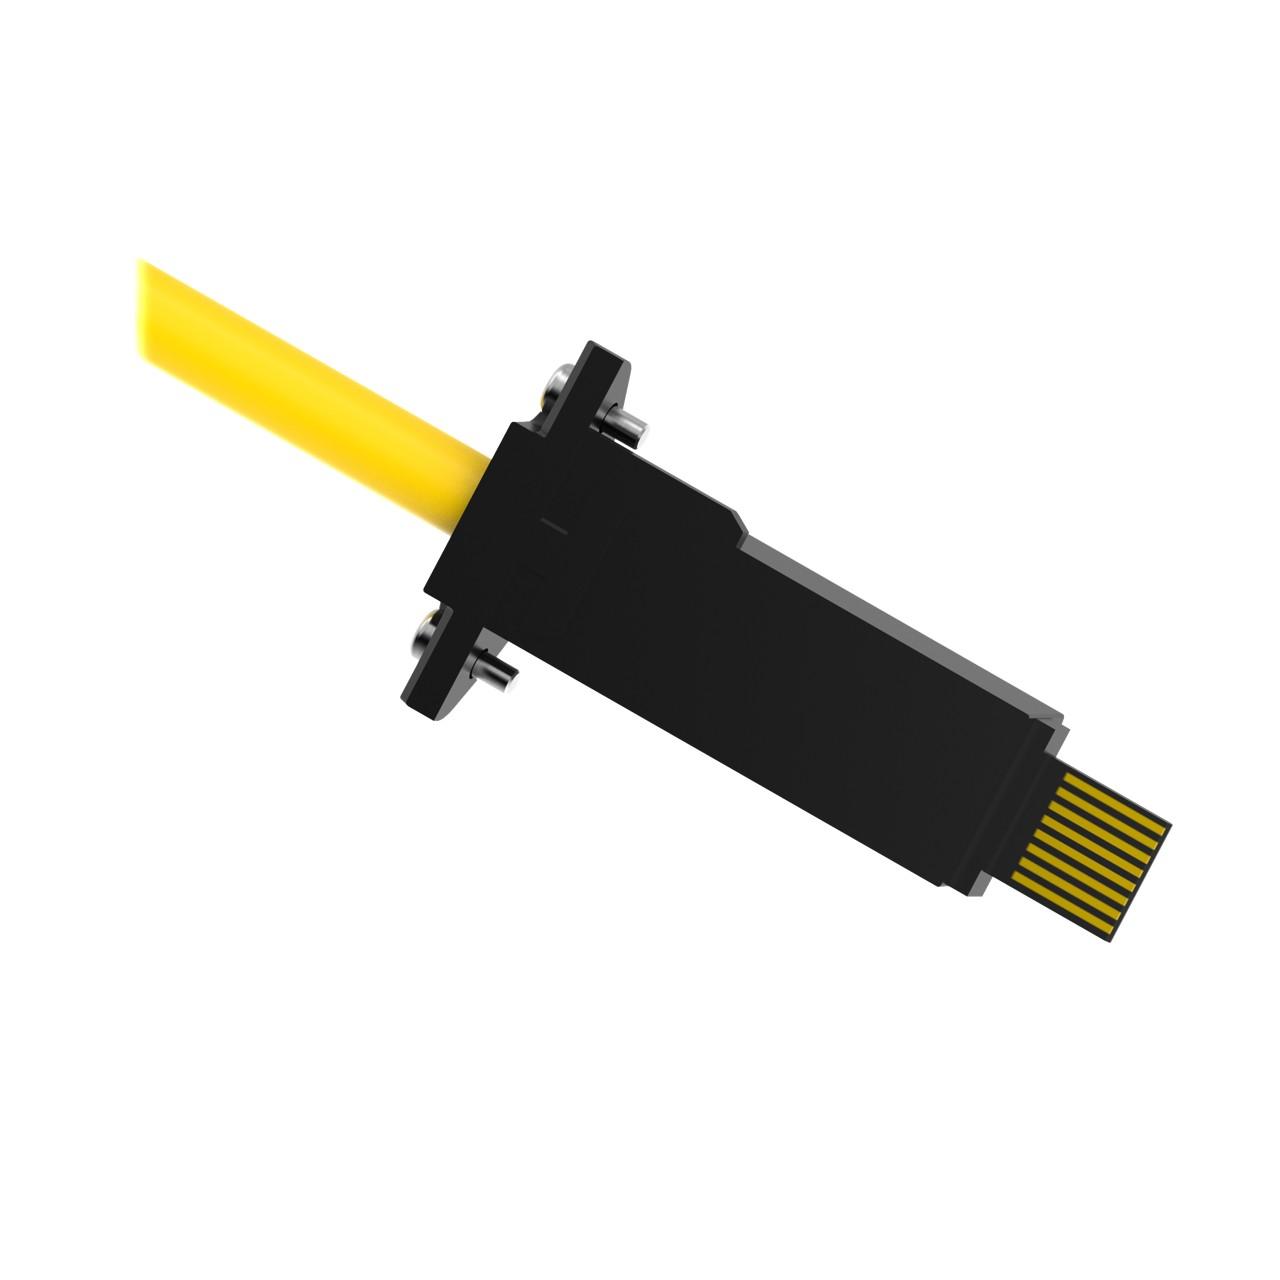 Banner RDLP-825D EZ-SCREEN Low Profile Custom RD with Flying Leads Cordset, 8-pin Flying Leads to Custom RD Connector, 7.6 m (25 ft) in Length, Yellow Cable Jacket.